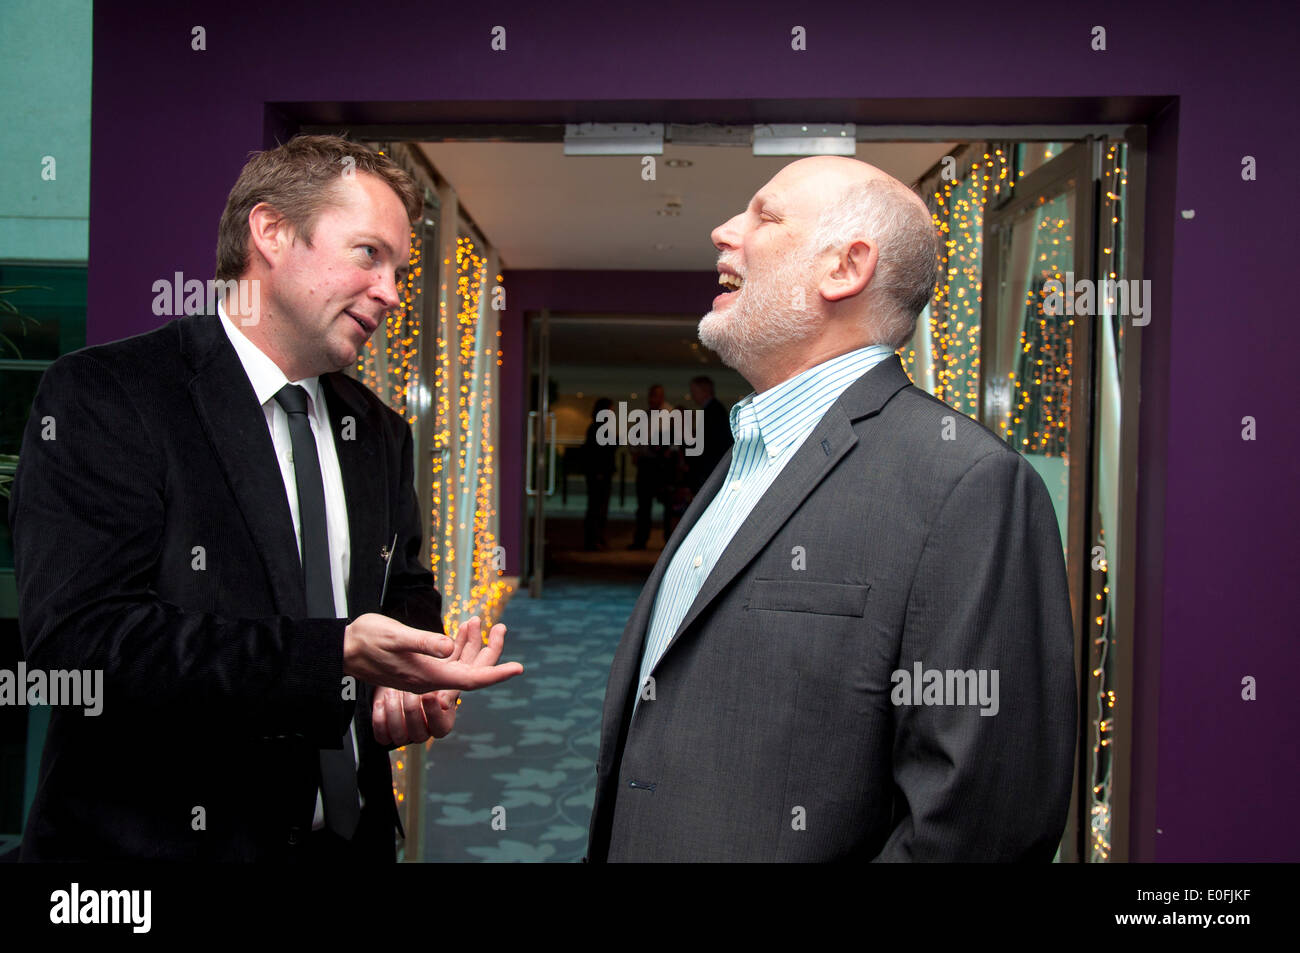 Two men talking networking at a business conference social event Stock Photo